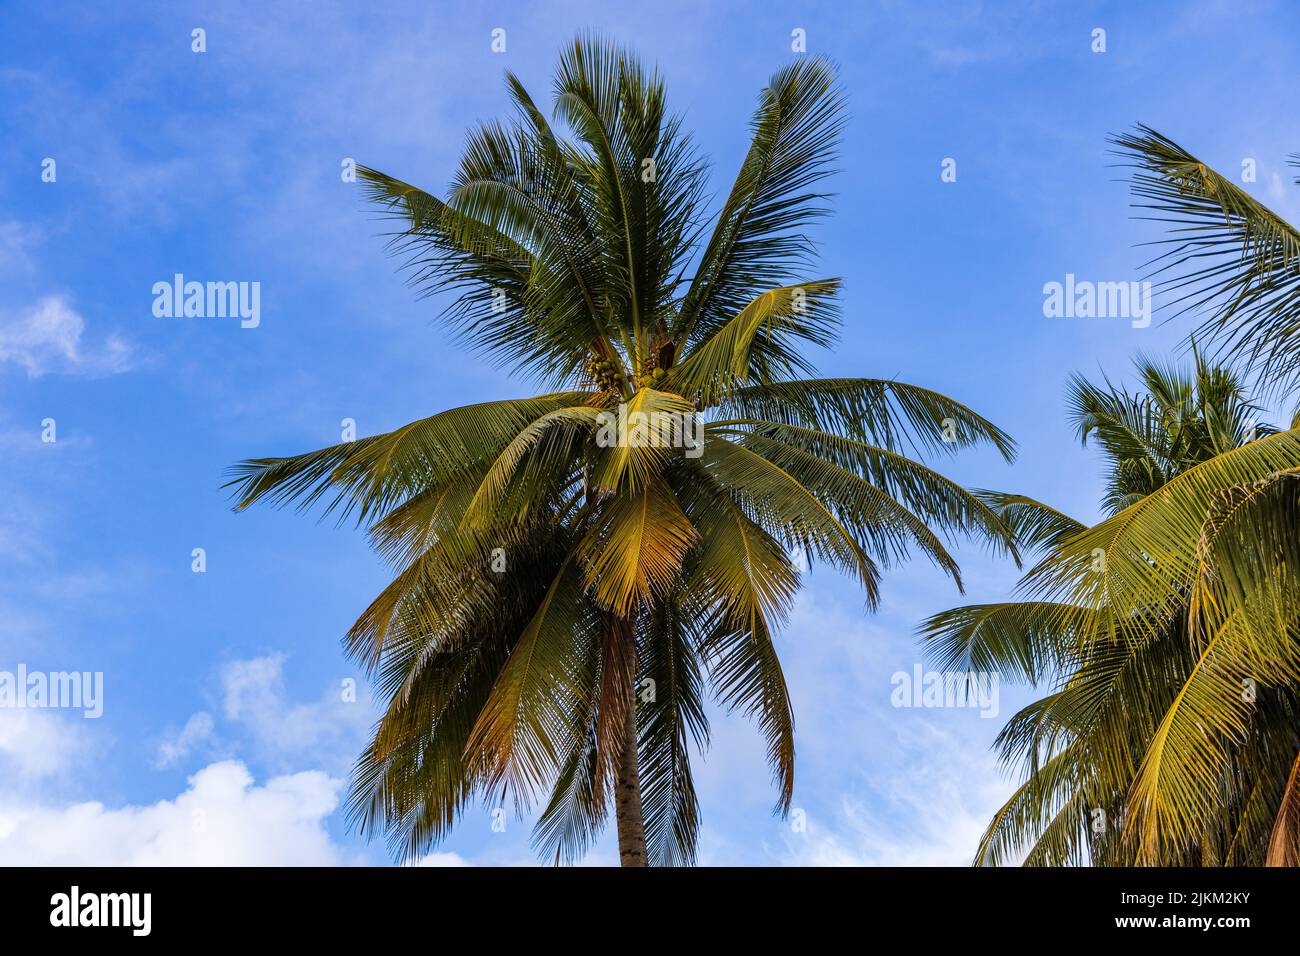 A low angle shot of palm trees on Worthing Beach in Worthing, Barbados Stock Photo